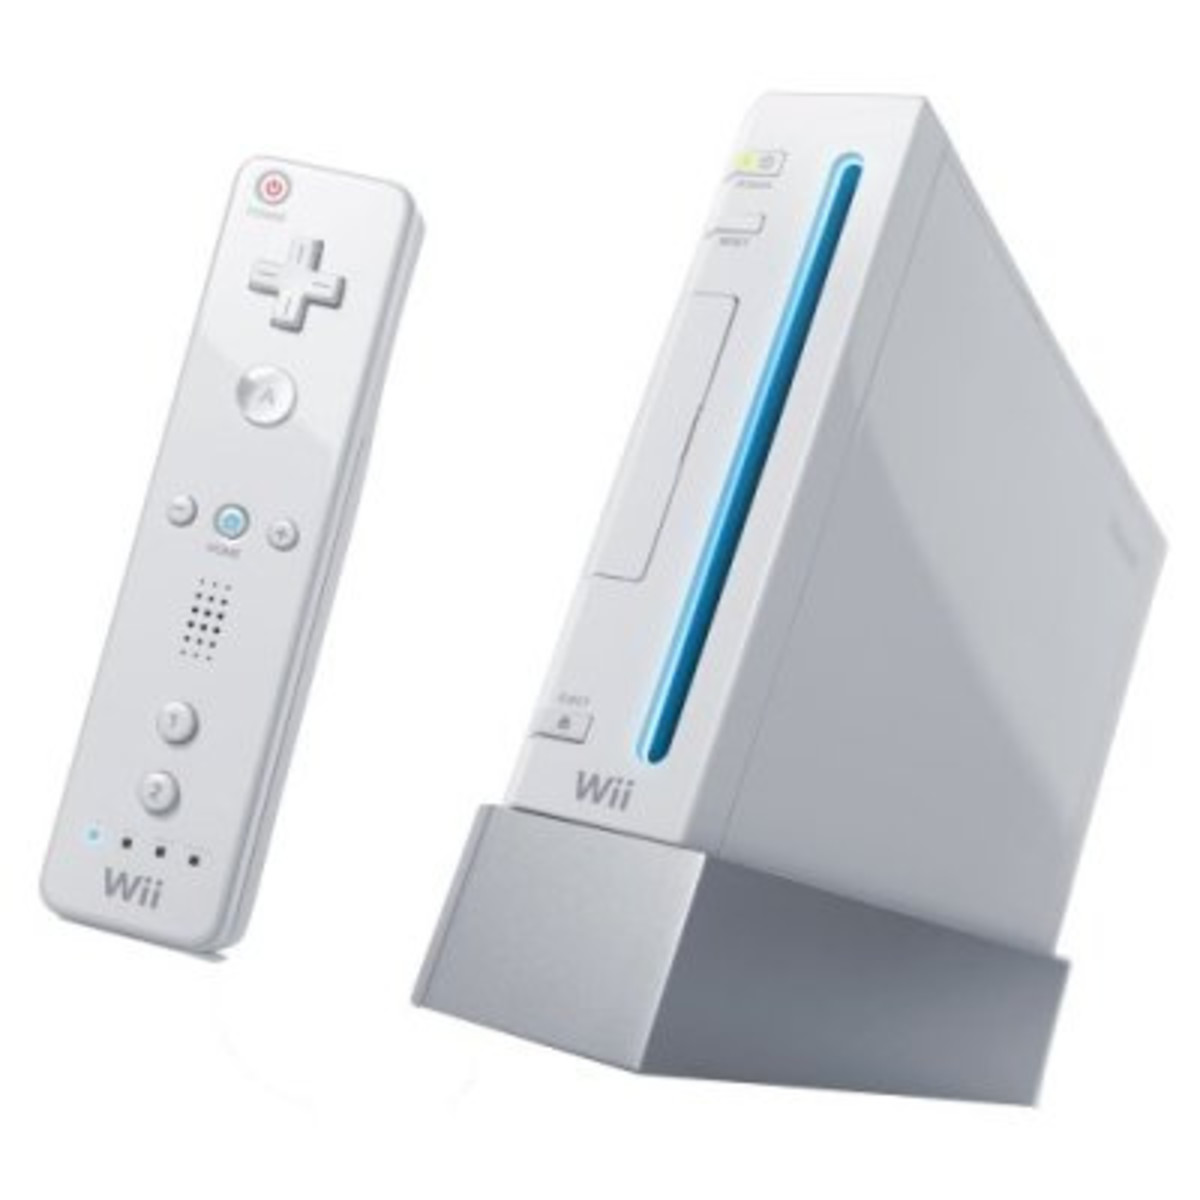 Best Nintendo Wii Games for Adults